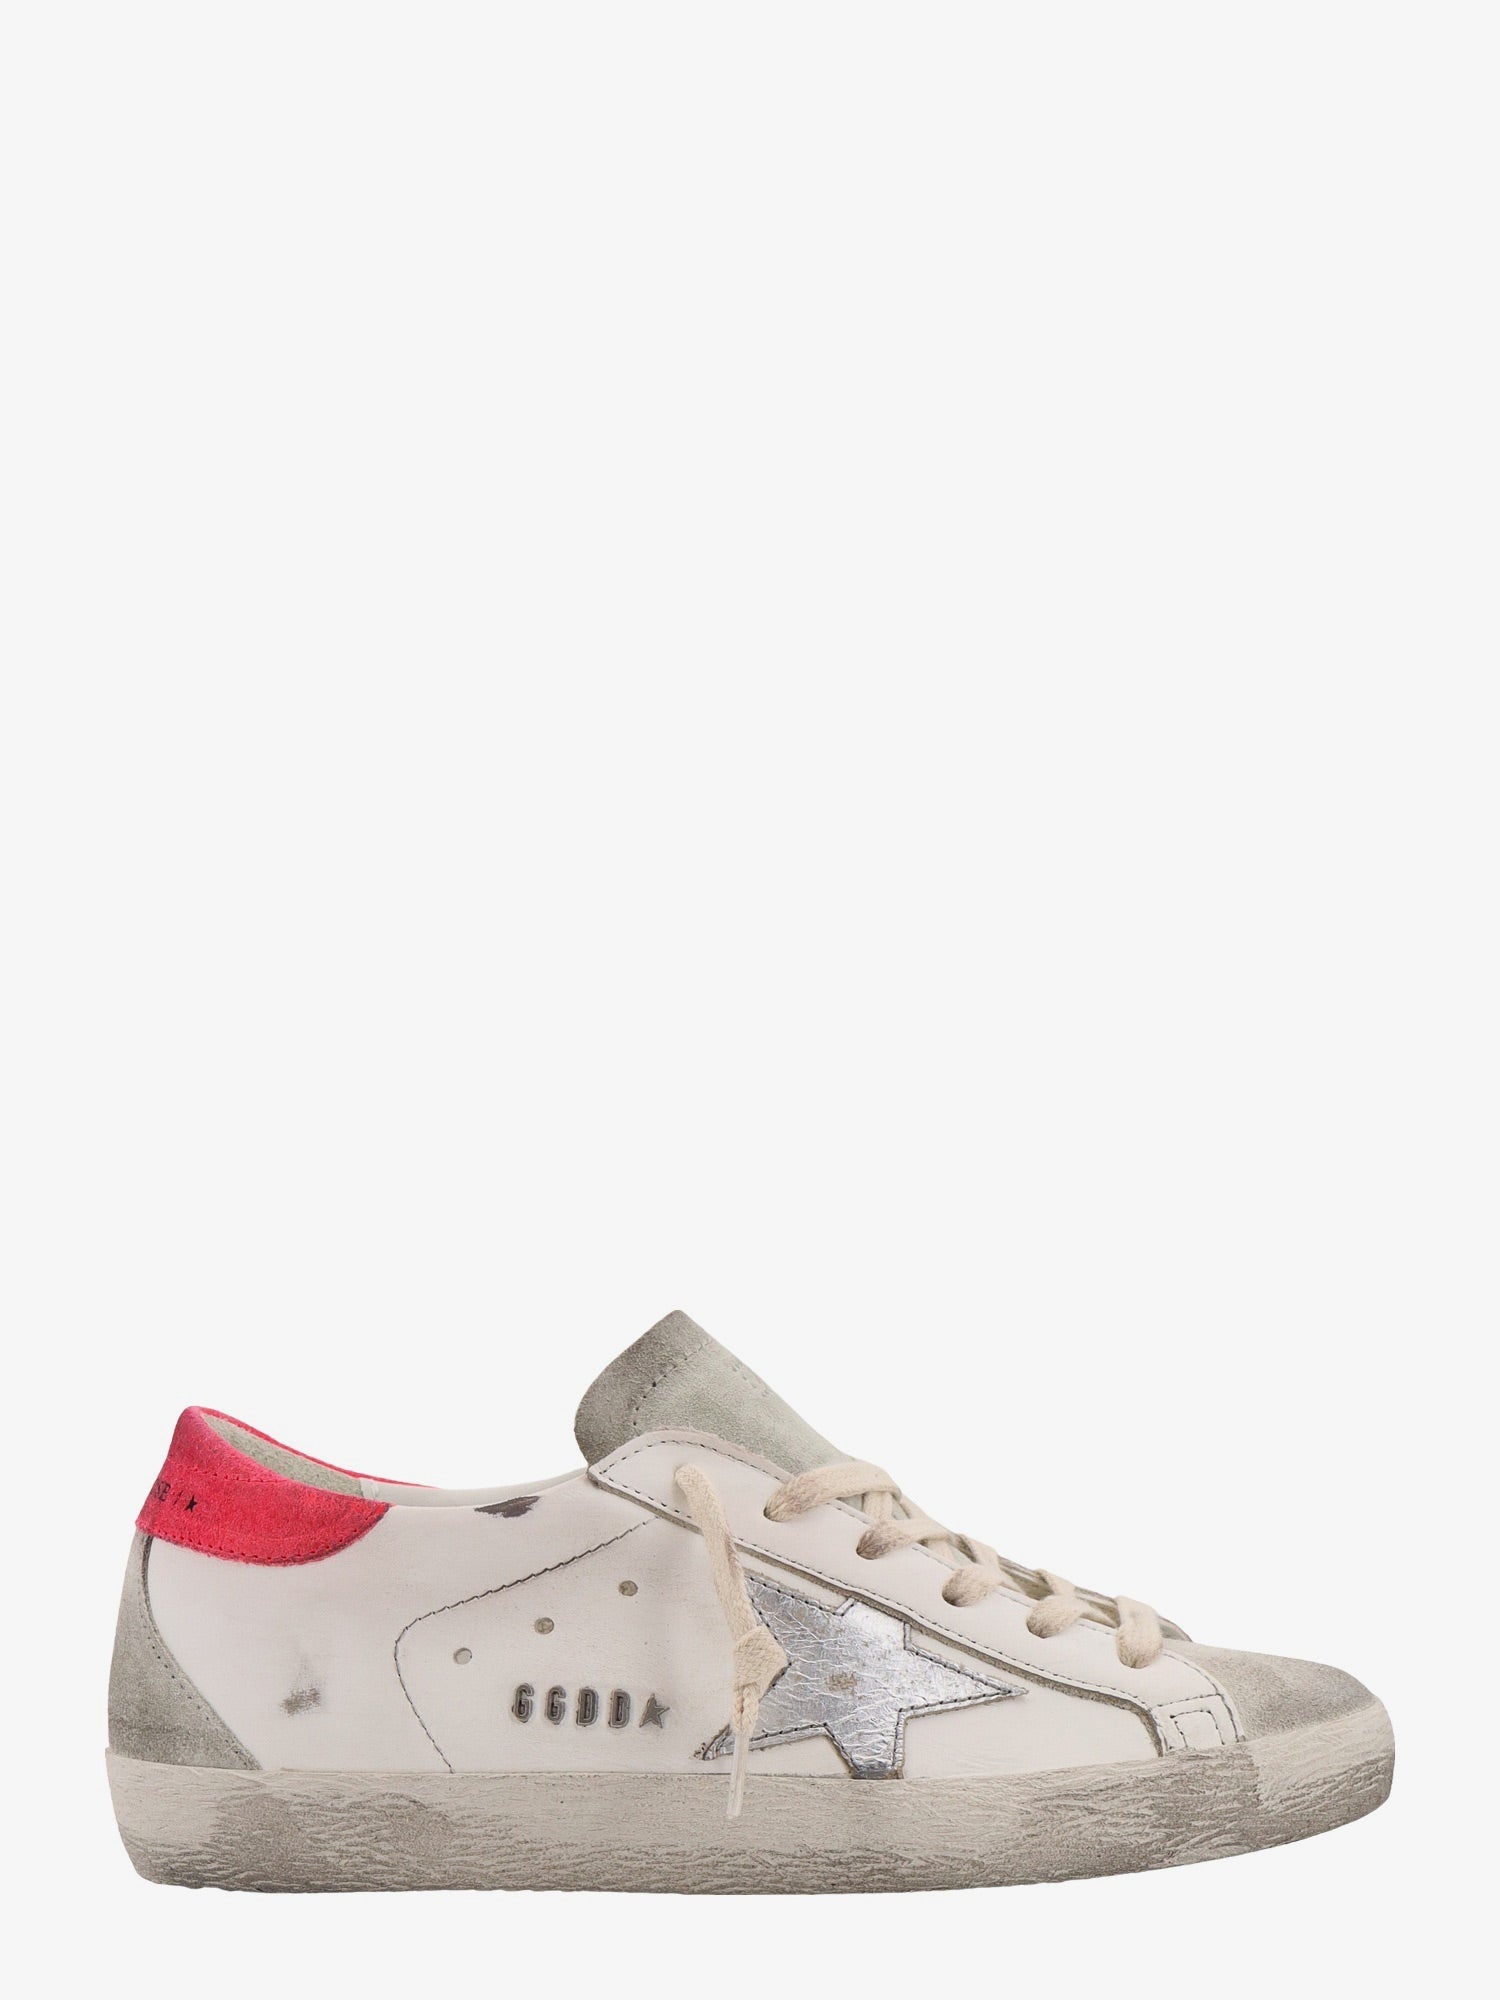 Golden Goose Deluxe Brand Woman Super-Star Woman White Sneakers - 1